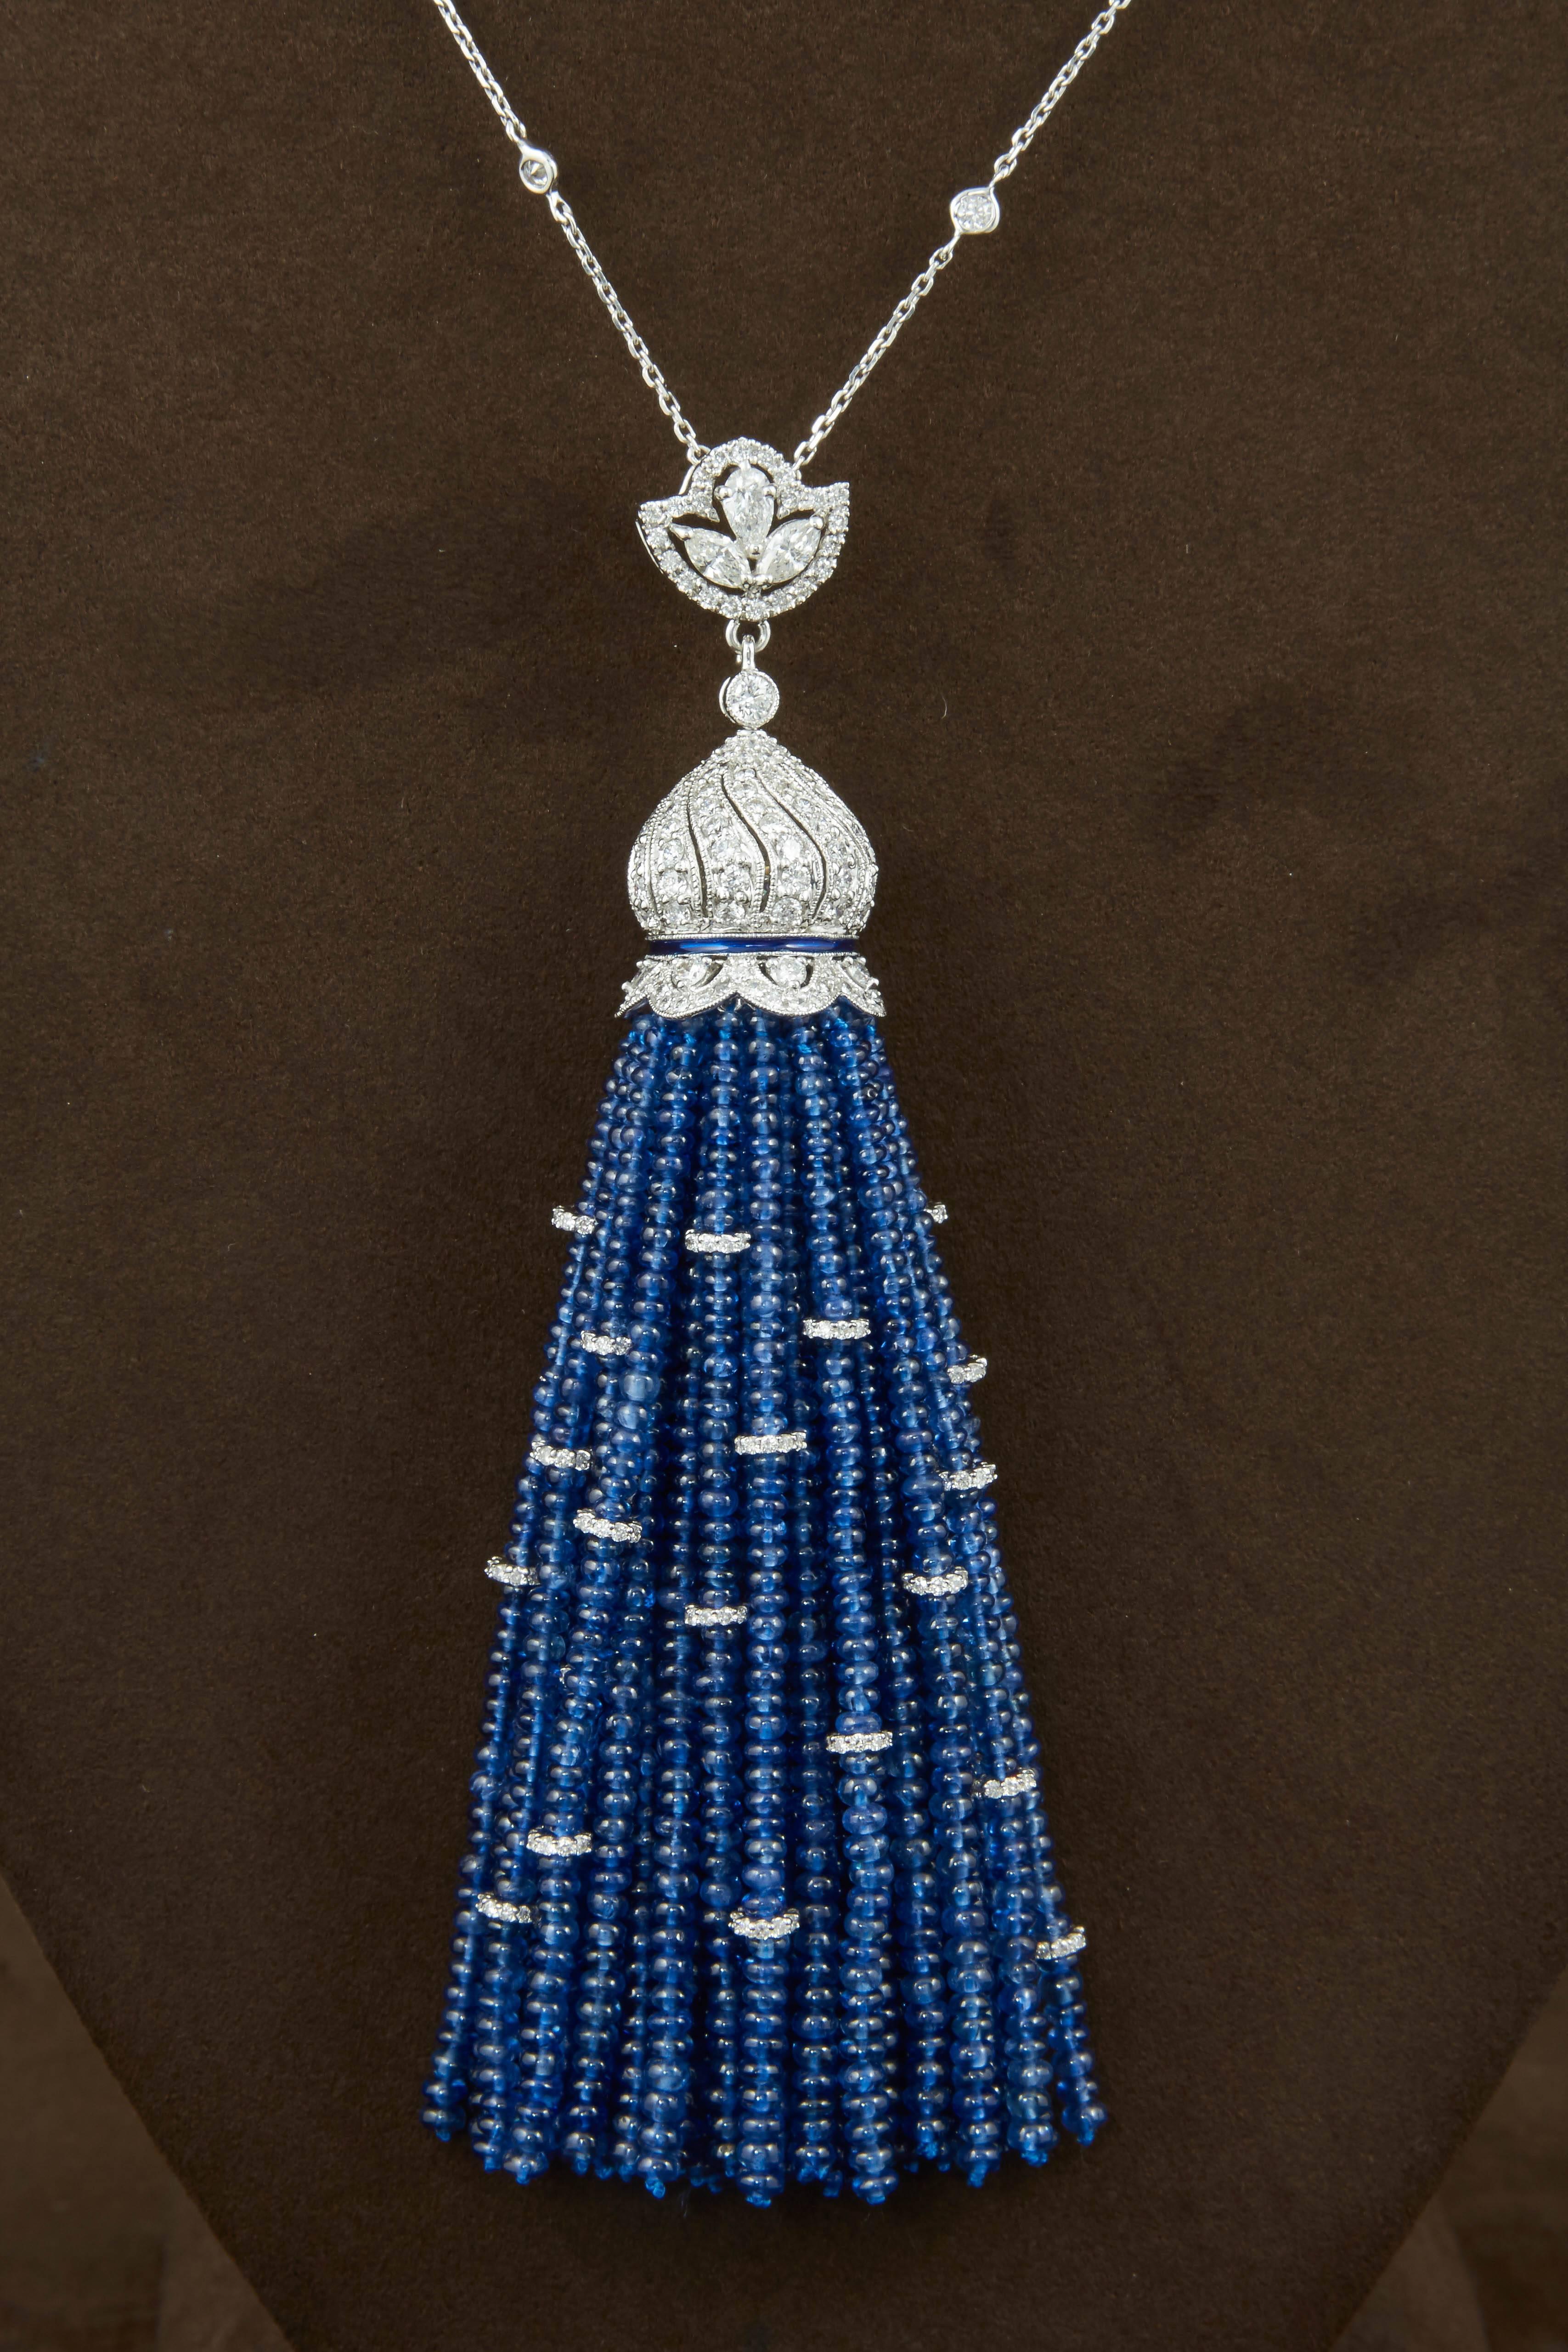 

A stunning piece!

Over 200 carats of fine sapphire!

7.85 carats of G/VS diamonds

18k white gold

The tassel piece measures approximately 4.4 inches long and it hangs from a 32 inch diamond by yard chain. The diamond by yard chain is removable